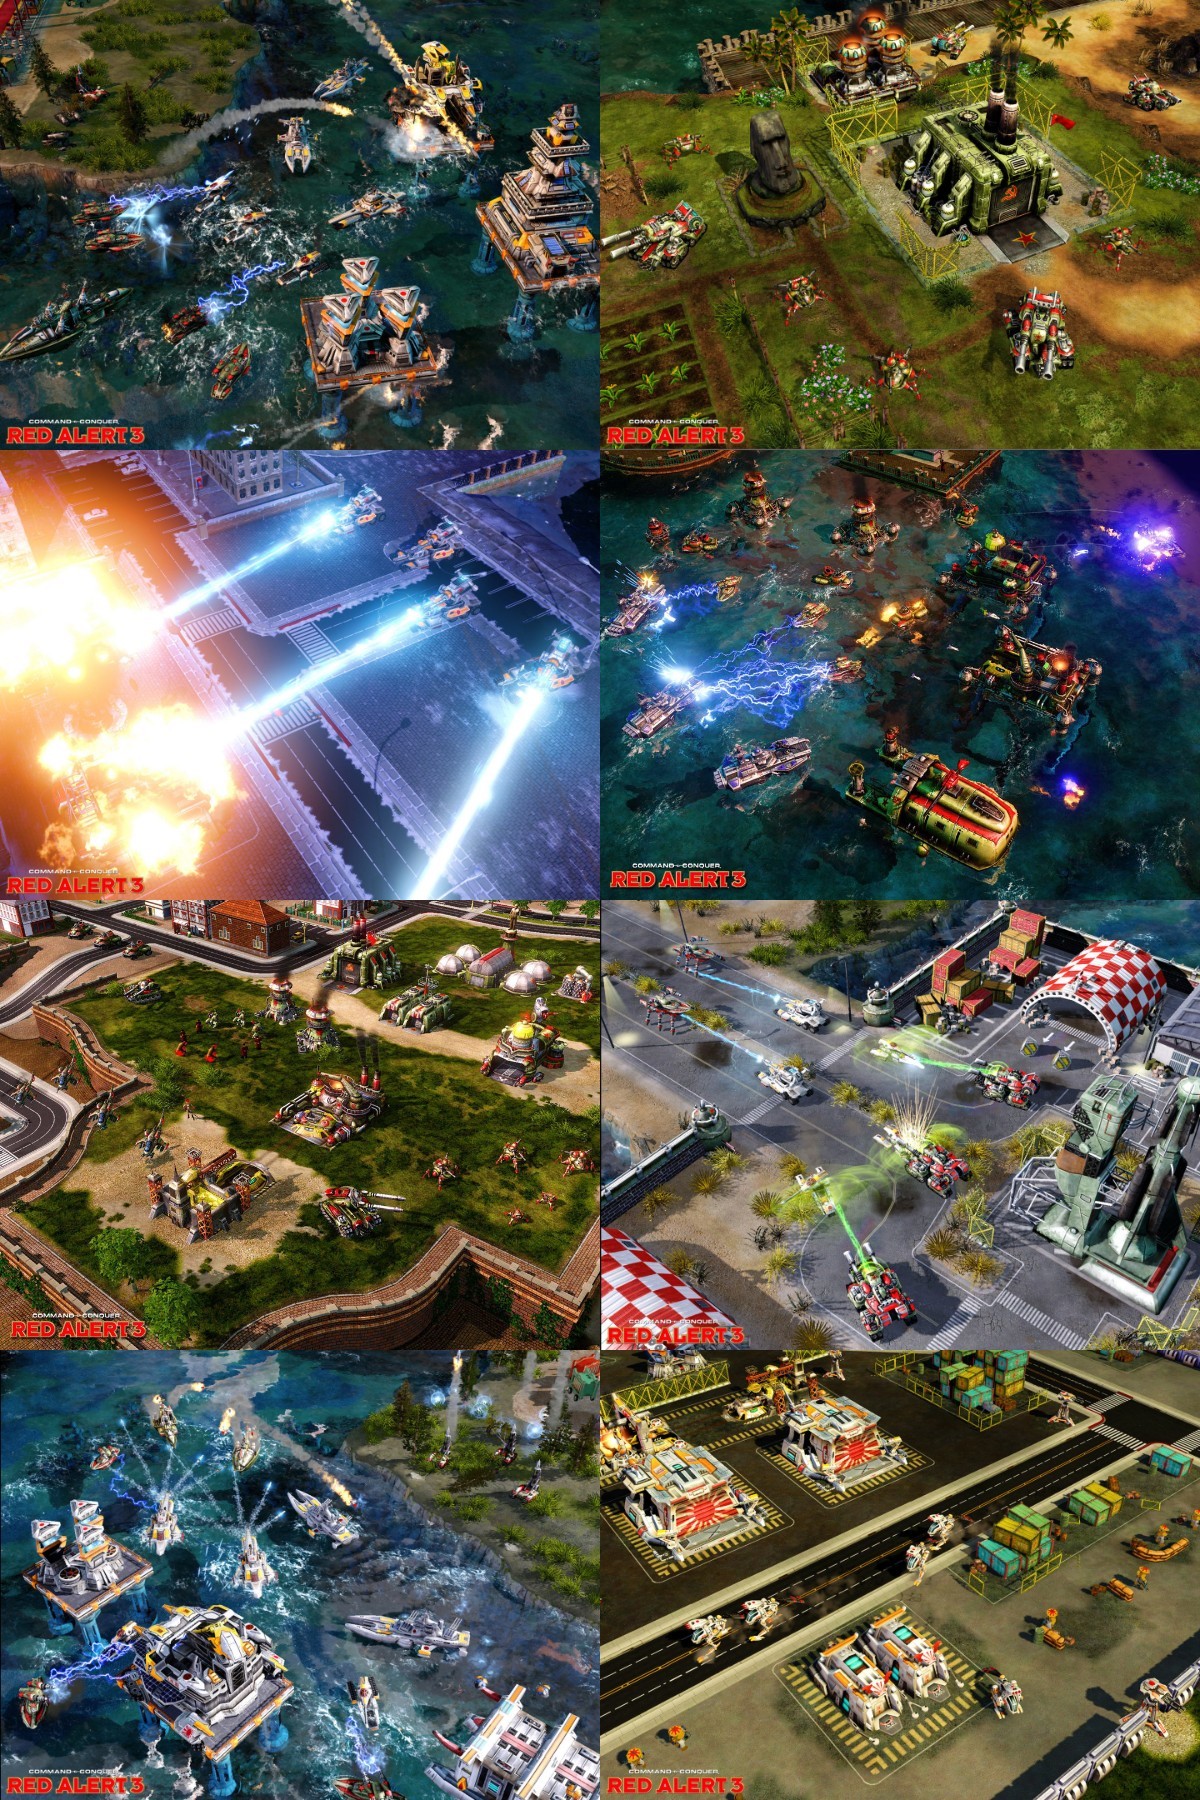 Command and Conquer - Red Alert 3 by xatab